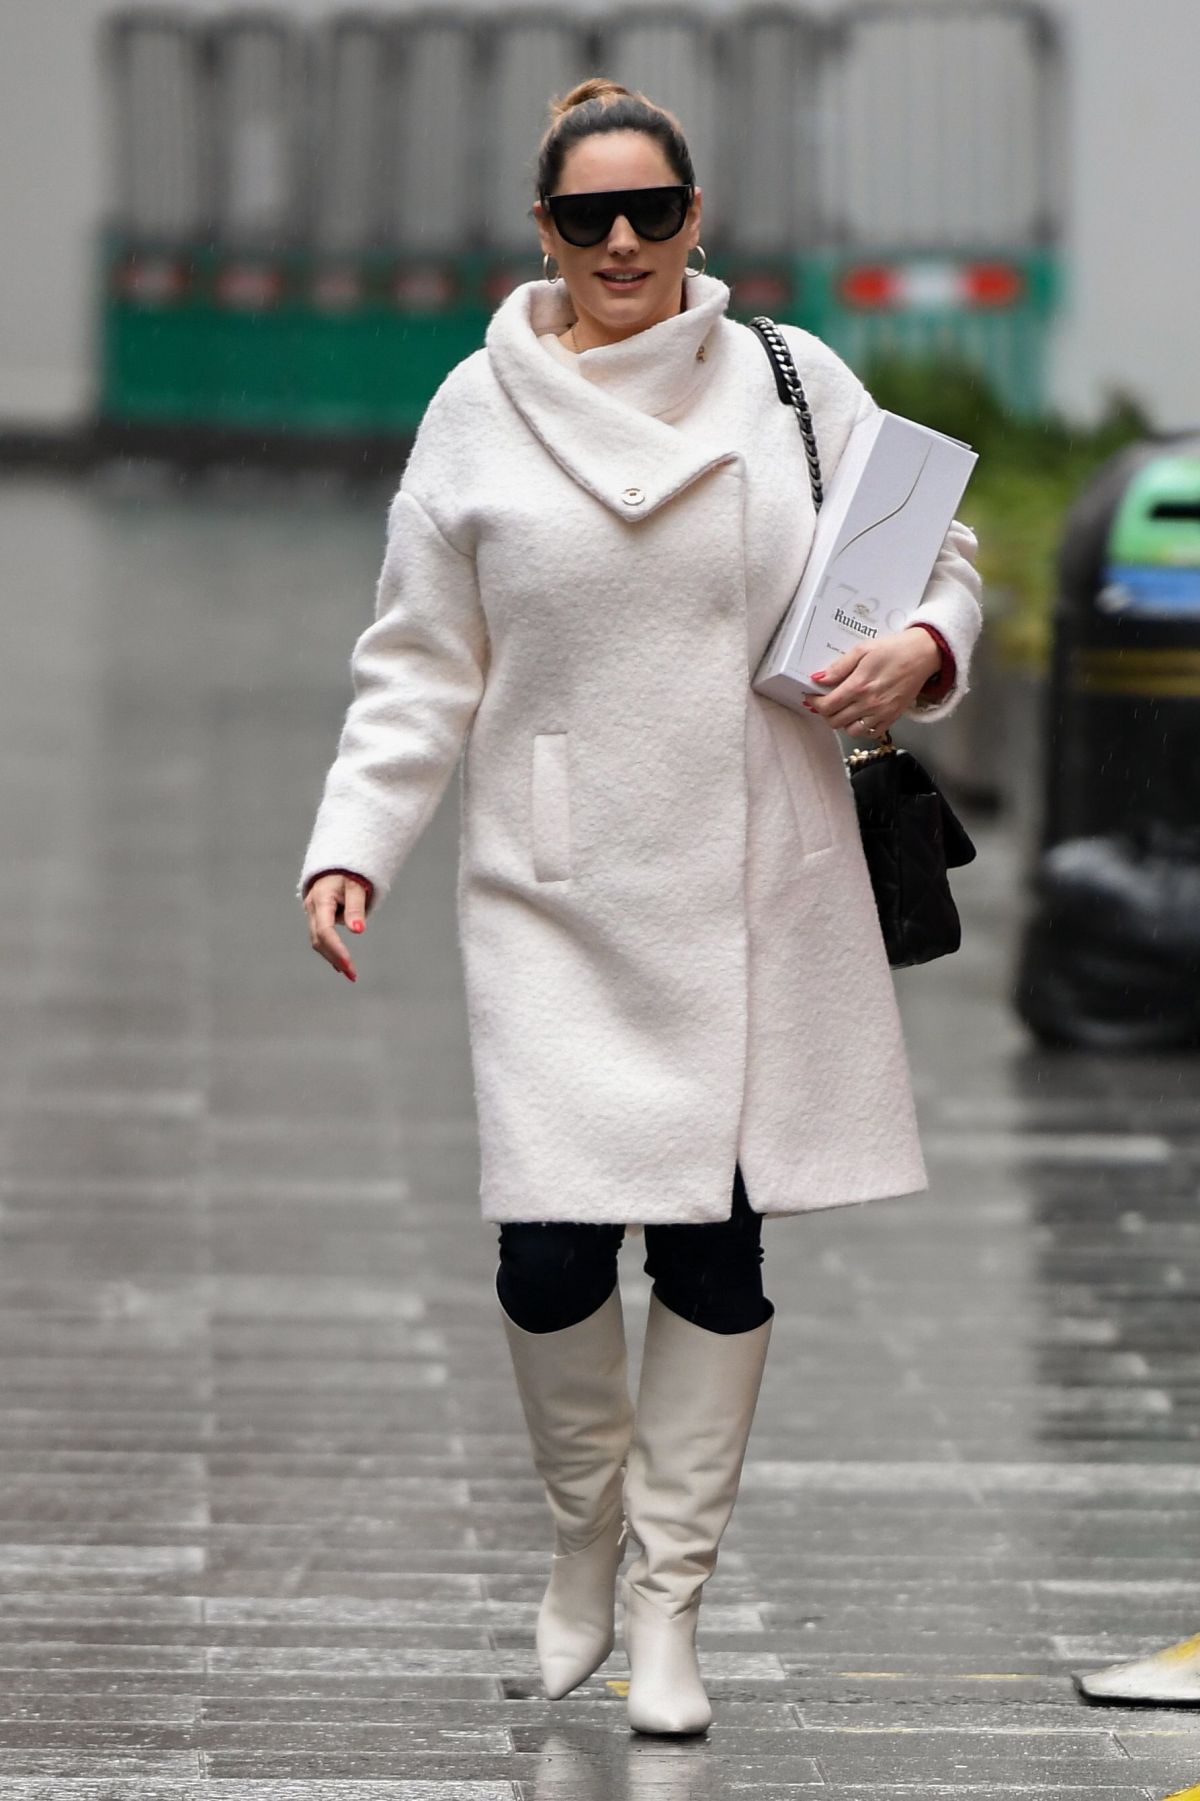 179310280_kelly-brook-in-a-white-coat-and-boots-at-global-radio-in-london-12-23-2020-0.jpg